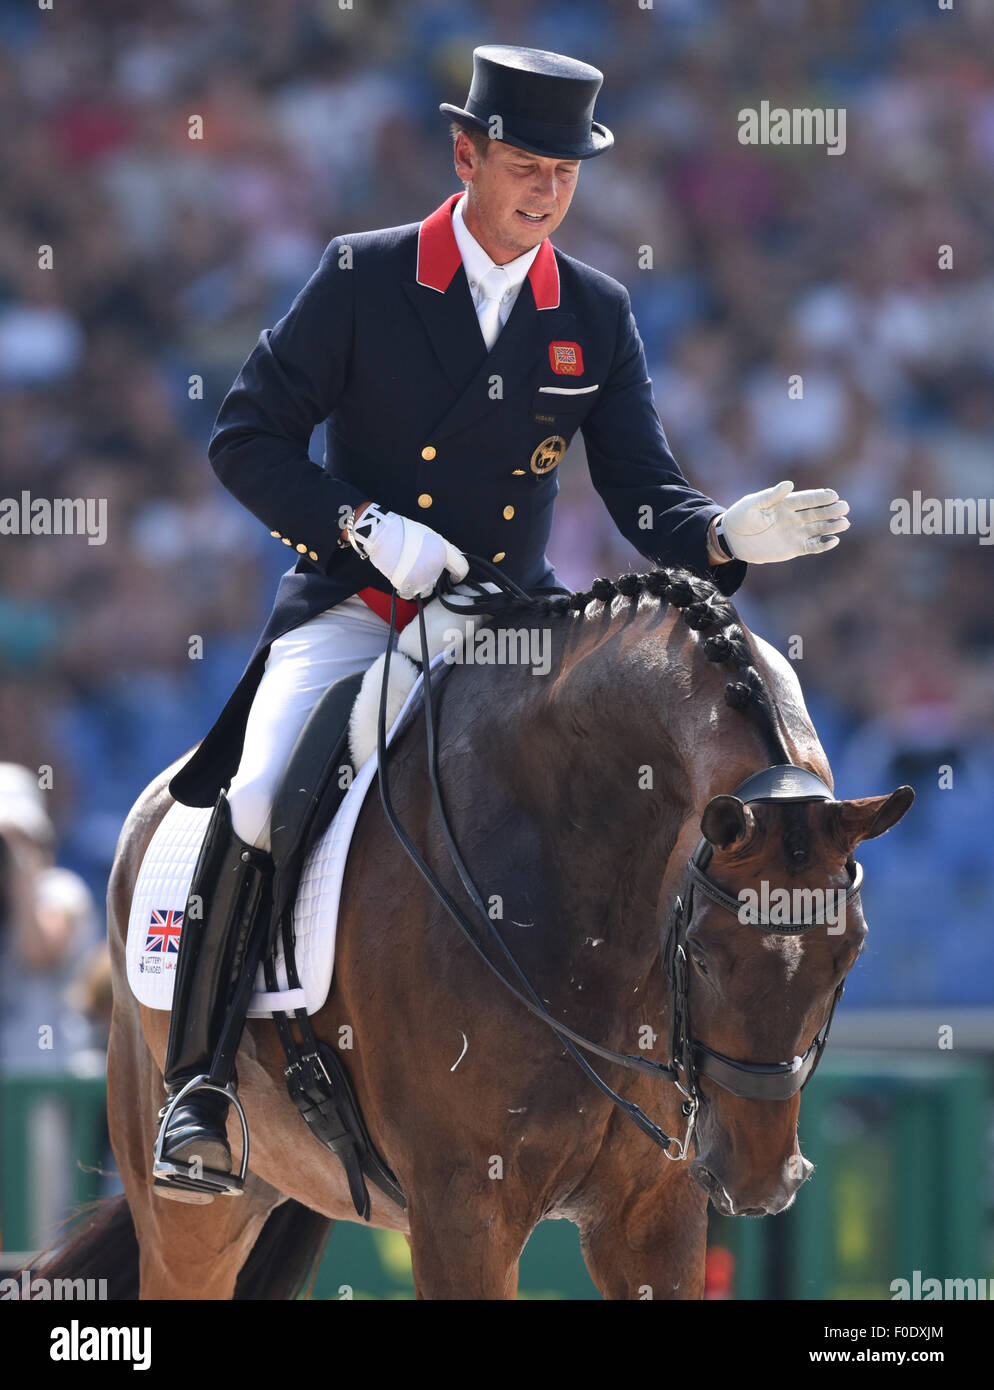 Aachen, Germany. 13th Aug, 2015. Carl Hester of Great Britain gestures on his horse Nip Tuck in the Grand Prix Dressage Team Final during the FEI European Championships in Aachen, Germany, 13 August 2015. Photo: Uwe Anspach/dpa/Alamy Live News Stock Photo